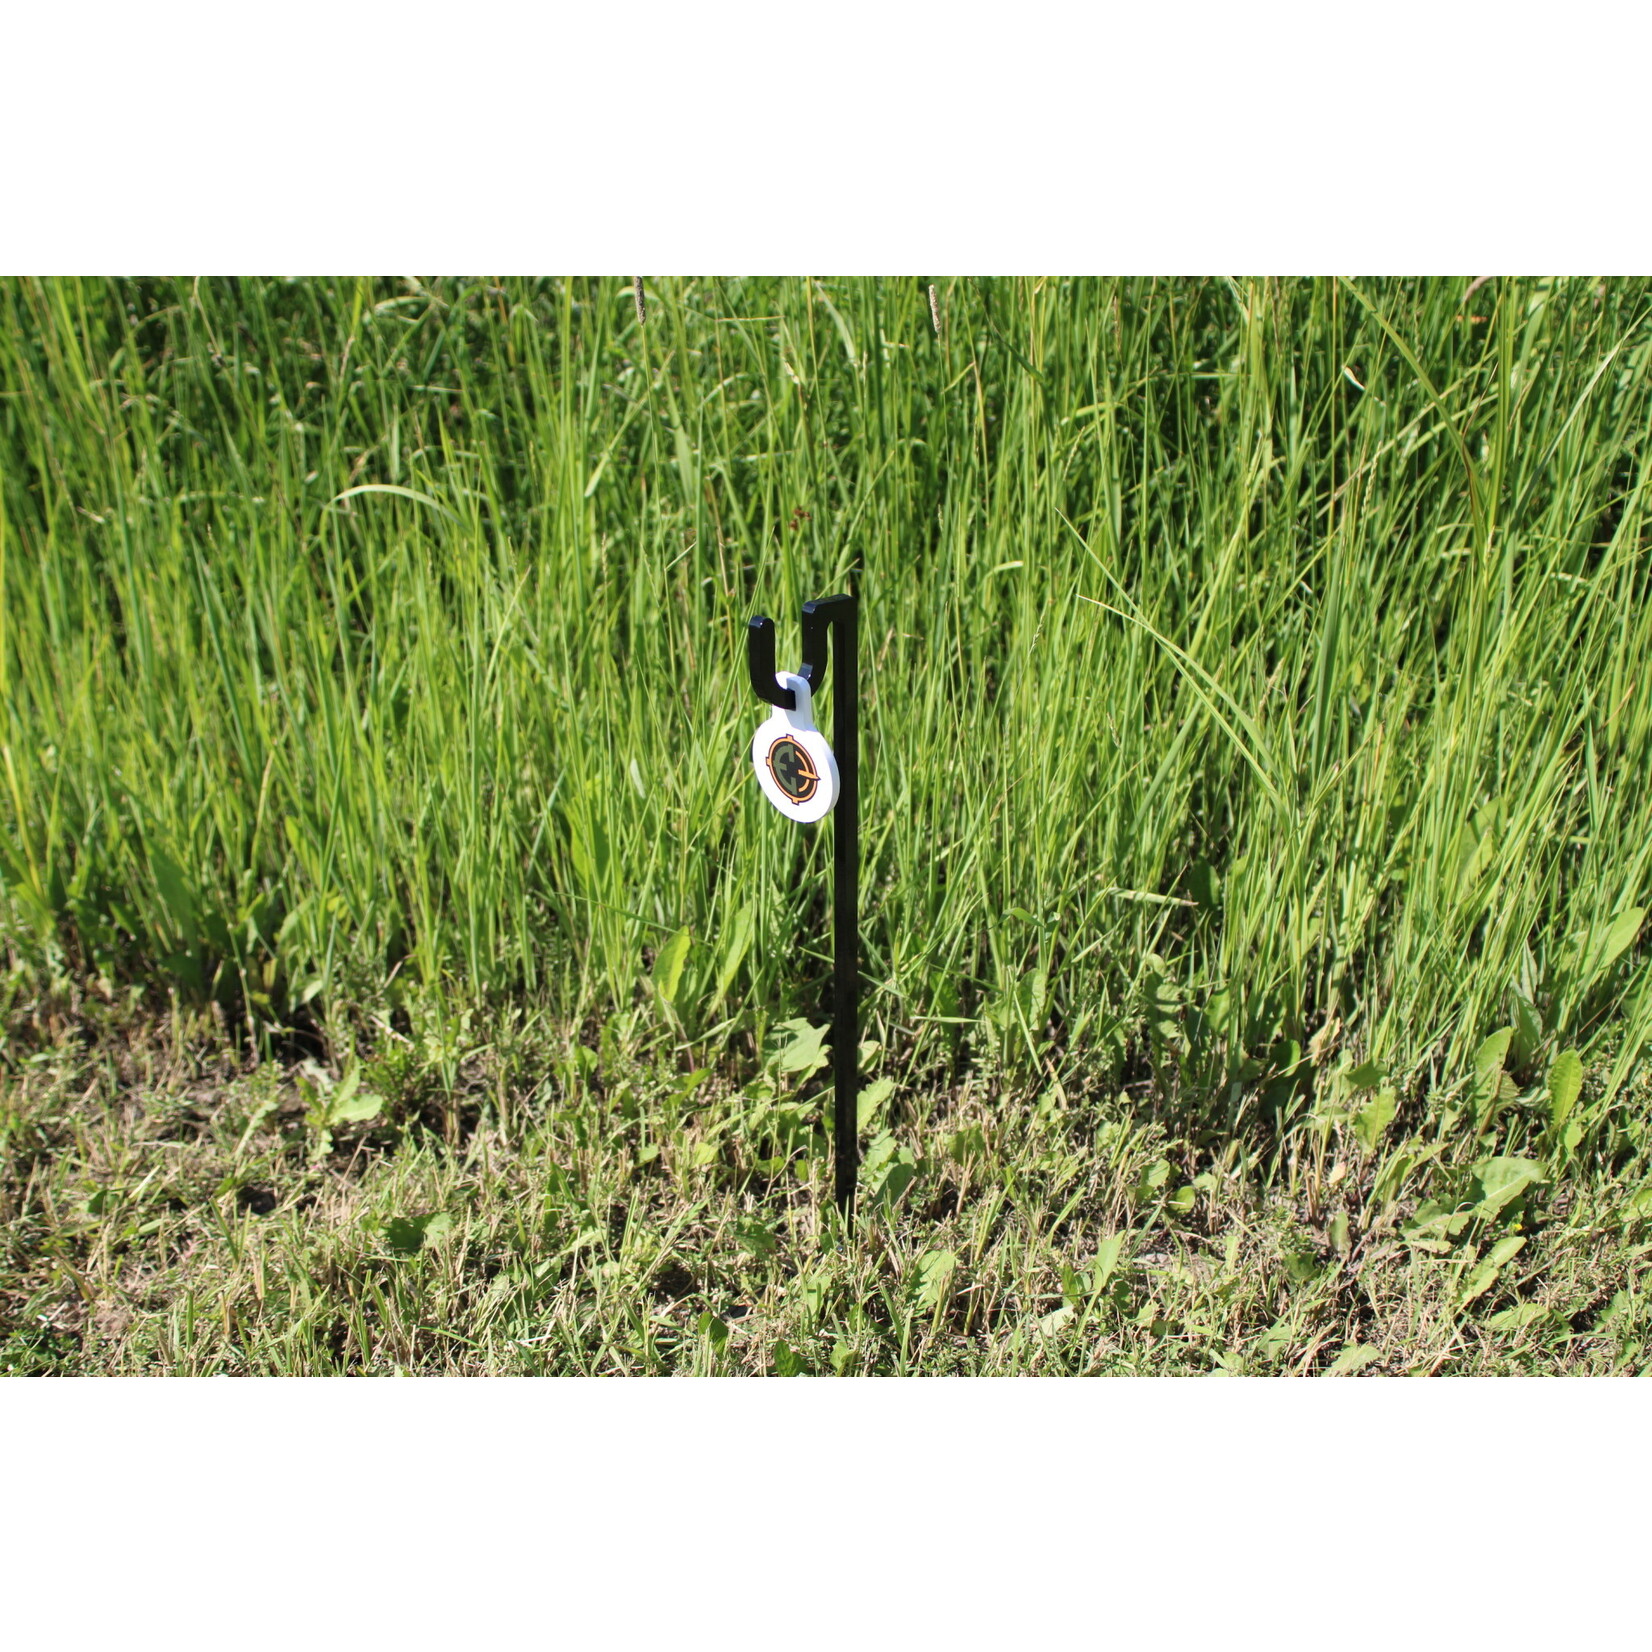 ENGAGE PRECISION ENGAGE PRECISION AR500 STEEL SHEPHERD HOOK TARGET STAND, 3/8”, 24” HEIGHT, W/ 1 HOOK, BLACK